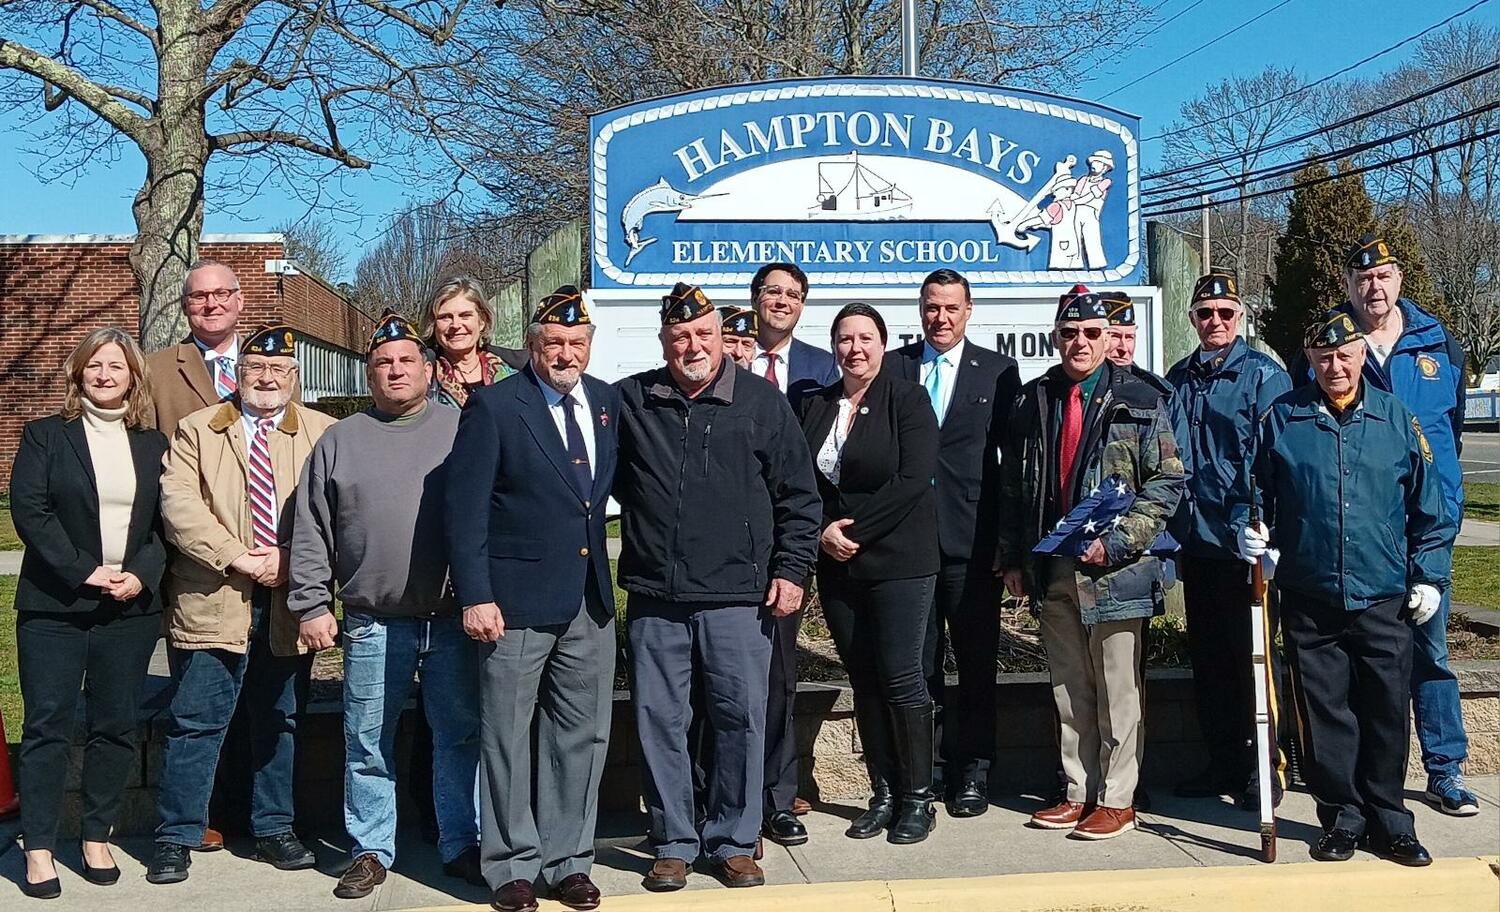 Hampton Bays School District honored veteran Sal Traversa with a flag raised in his honor on March 22. Traversa is a member of  American Legion Post #924 Hampton Bays and still serves the community. The event was attended by many Veterans and elected officials including NYS Senator Anthony Palumbo, Suffolk County Legislator Ann Welker, Southampton Town Supervisor Maria Moore, Councilwoman Cyndi McNamara, Councilman Michael Iiselli and Hampton Bays Schools Superintendent Lars Clemensen.  COURTESY WILLIAM HUGHES